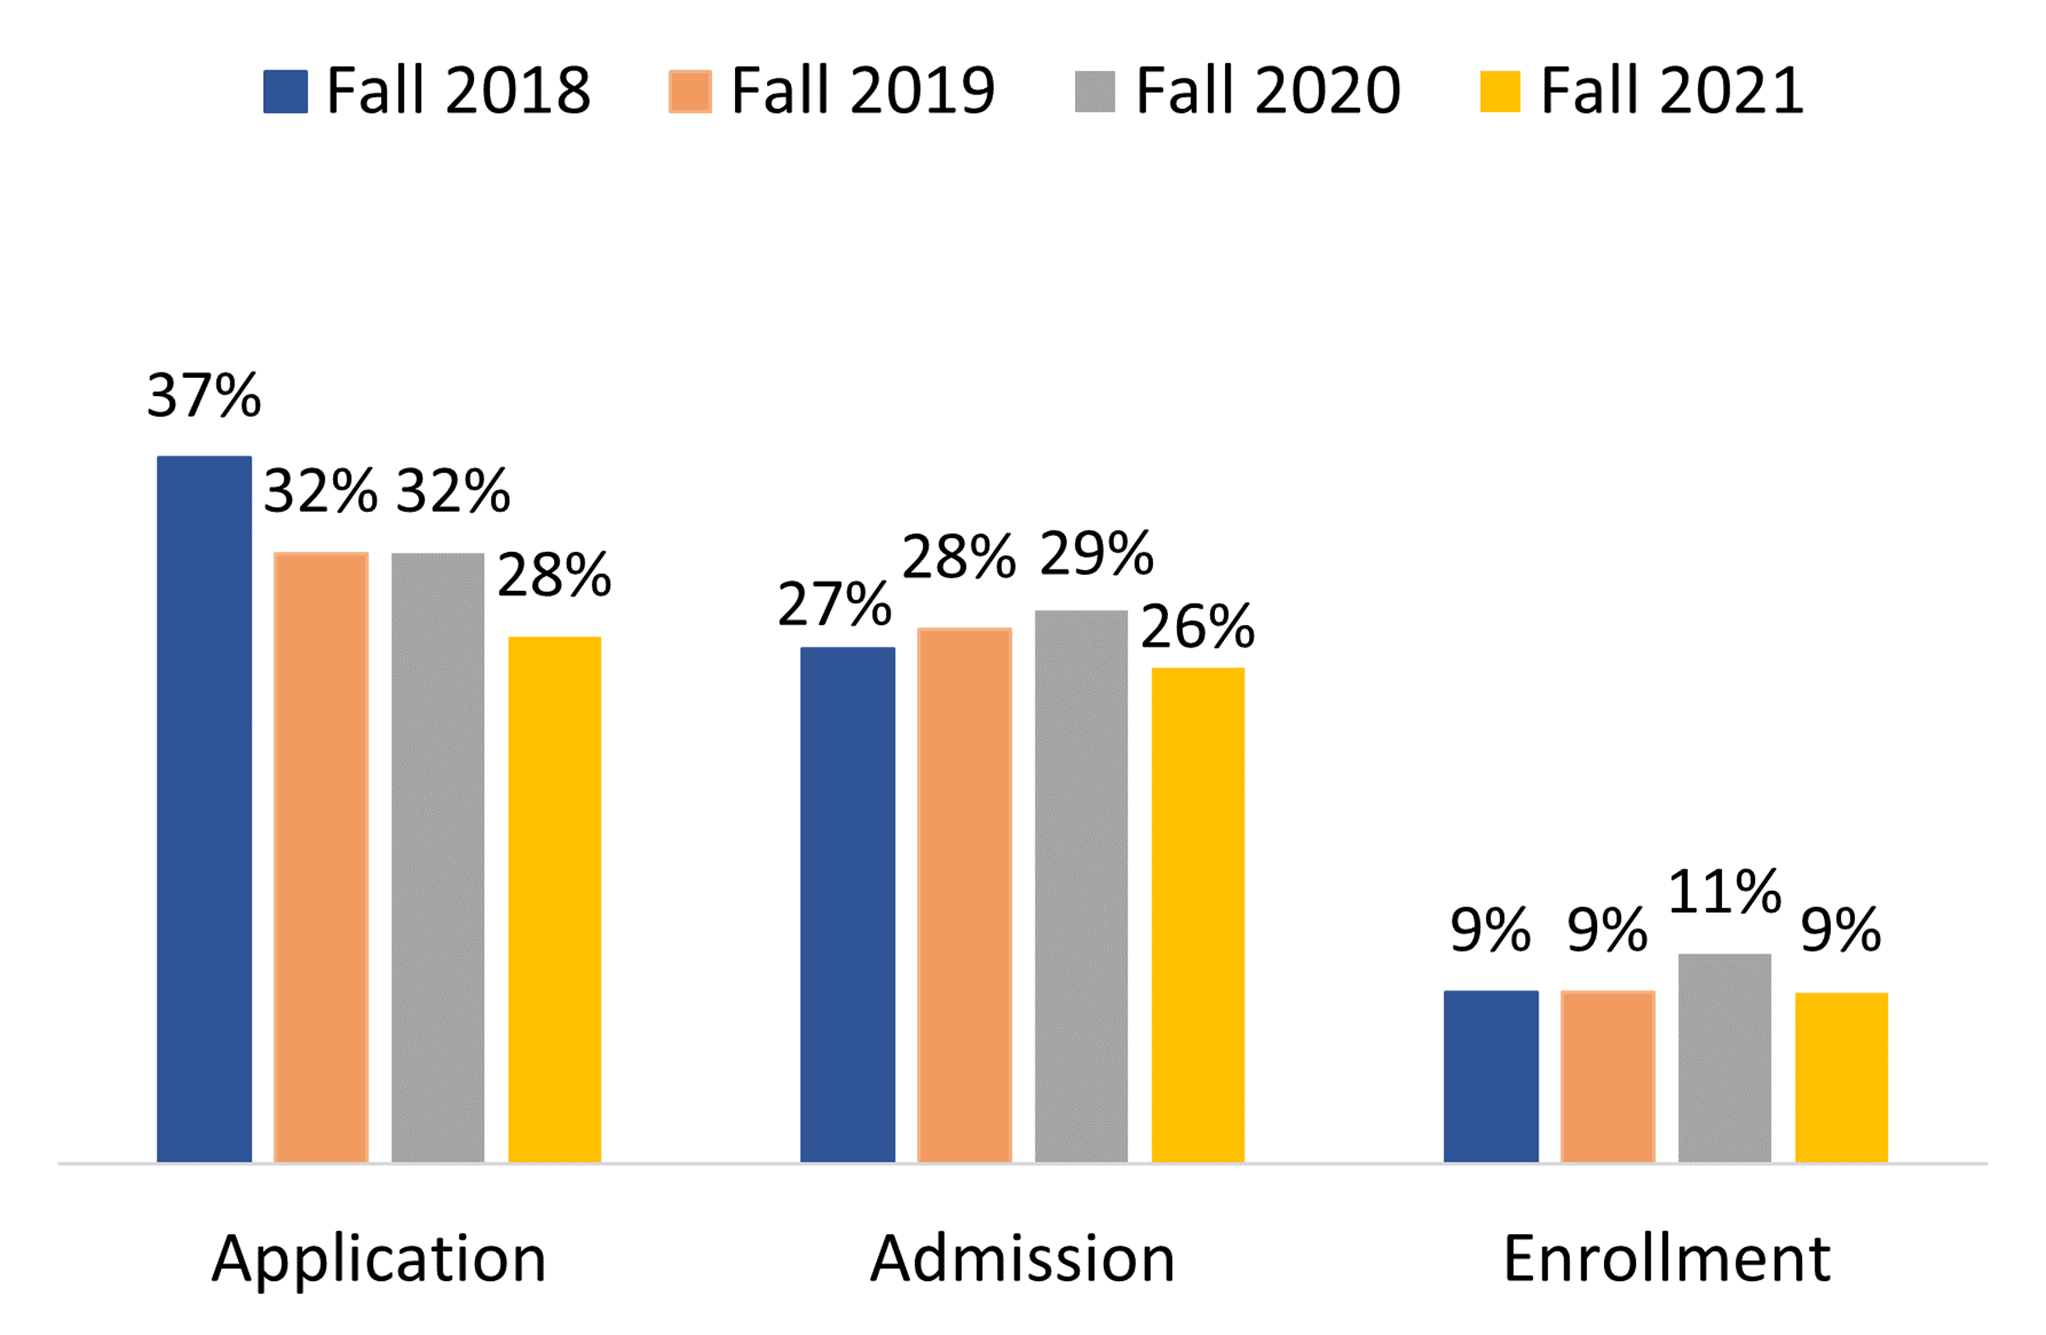 Three bar charts, each with values for Fall 2018, Fall 2019, Fall 2020, and Fall 2021. The application chart's percentages were 37% for 2018, 32% for 2019, 32% for 2020, and 28% for 2021. The admission chart's percentages were 27% for 2018, 28% for 2019, 29% for 2020, and 26% for 2021. The enrollment chart's percentages were 9% for both 2018, 9% for 2019, 11% for 2020, and 9% for 2021.